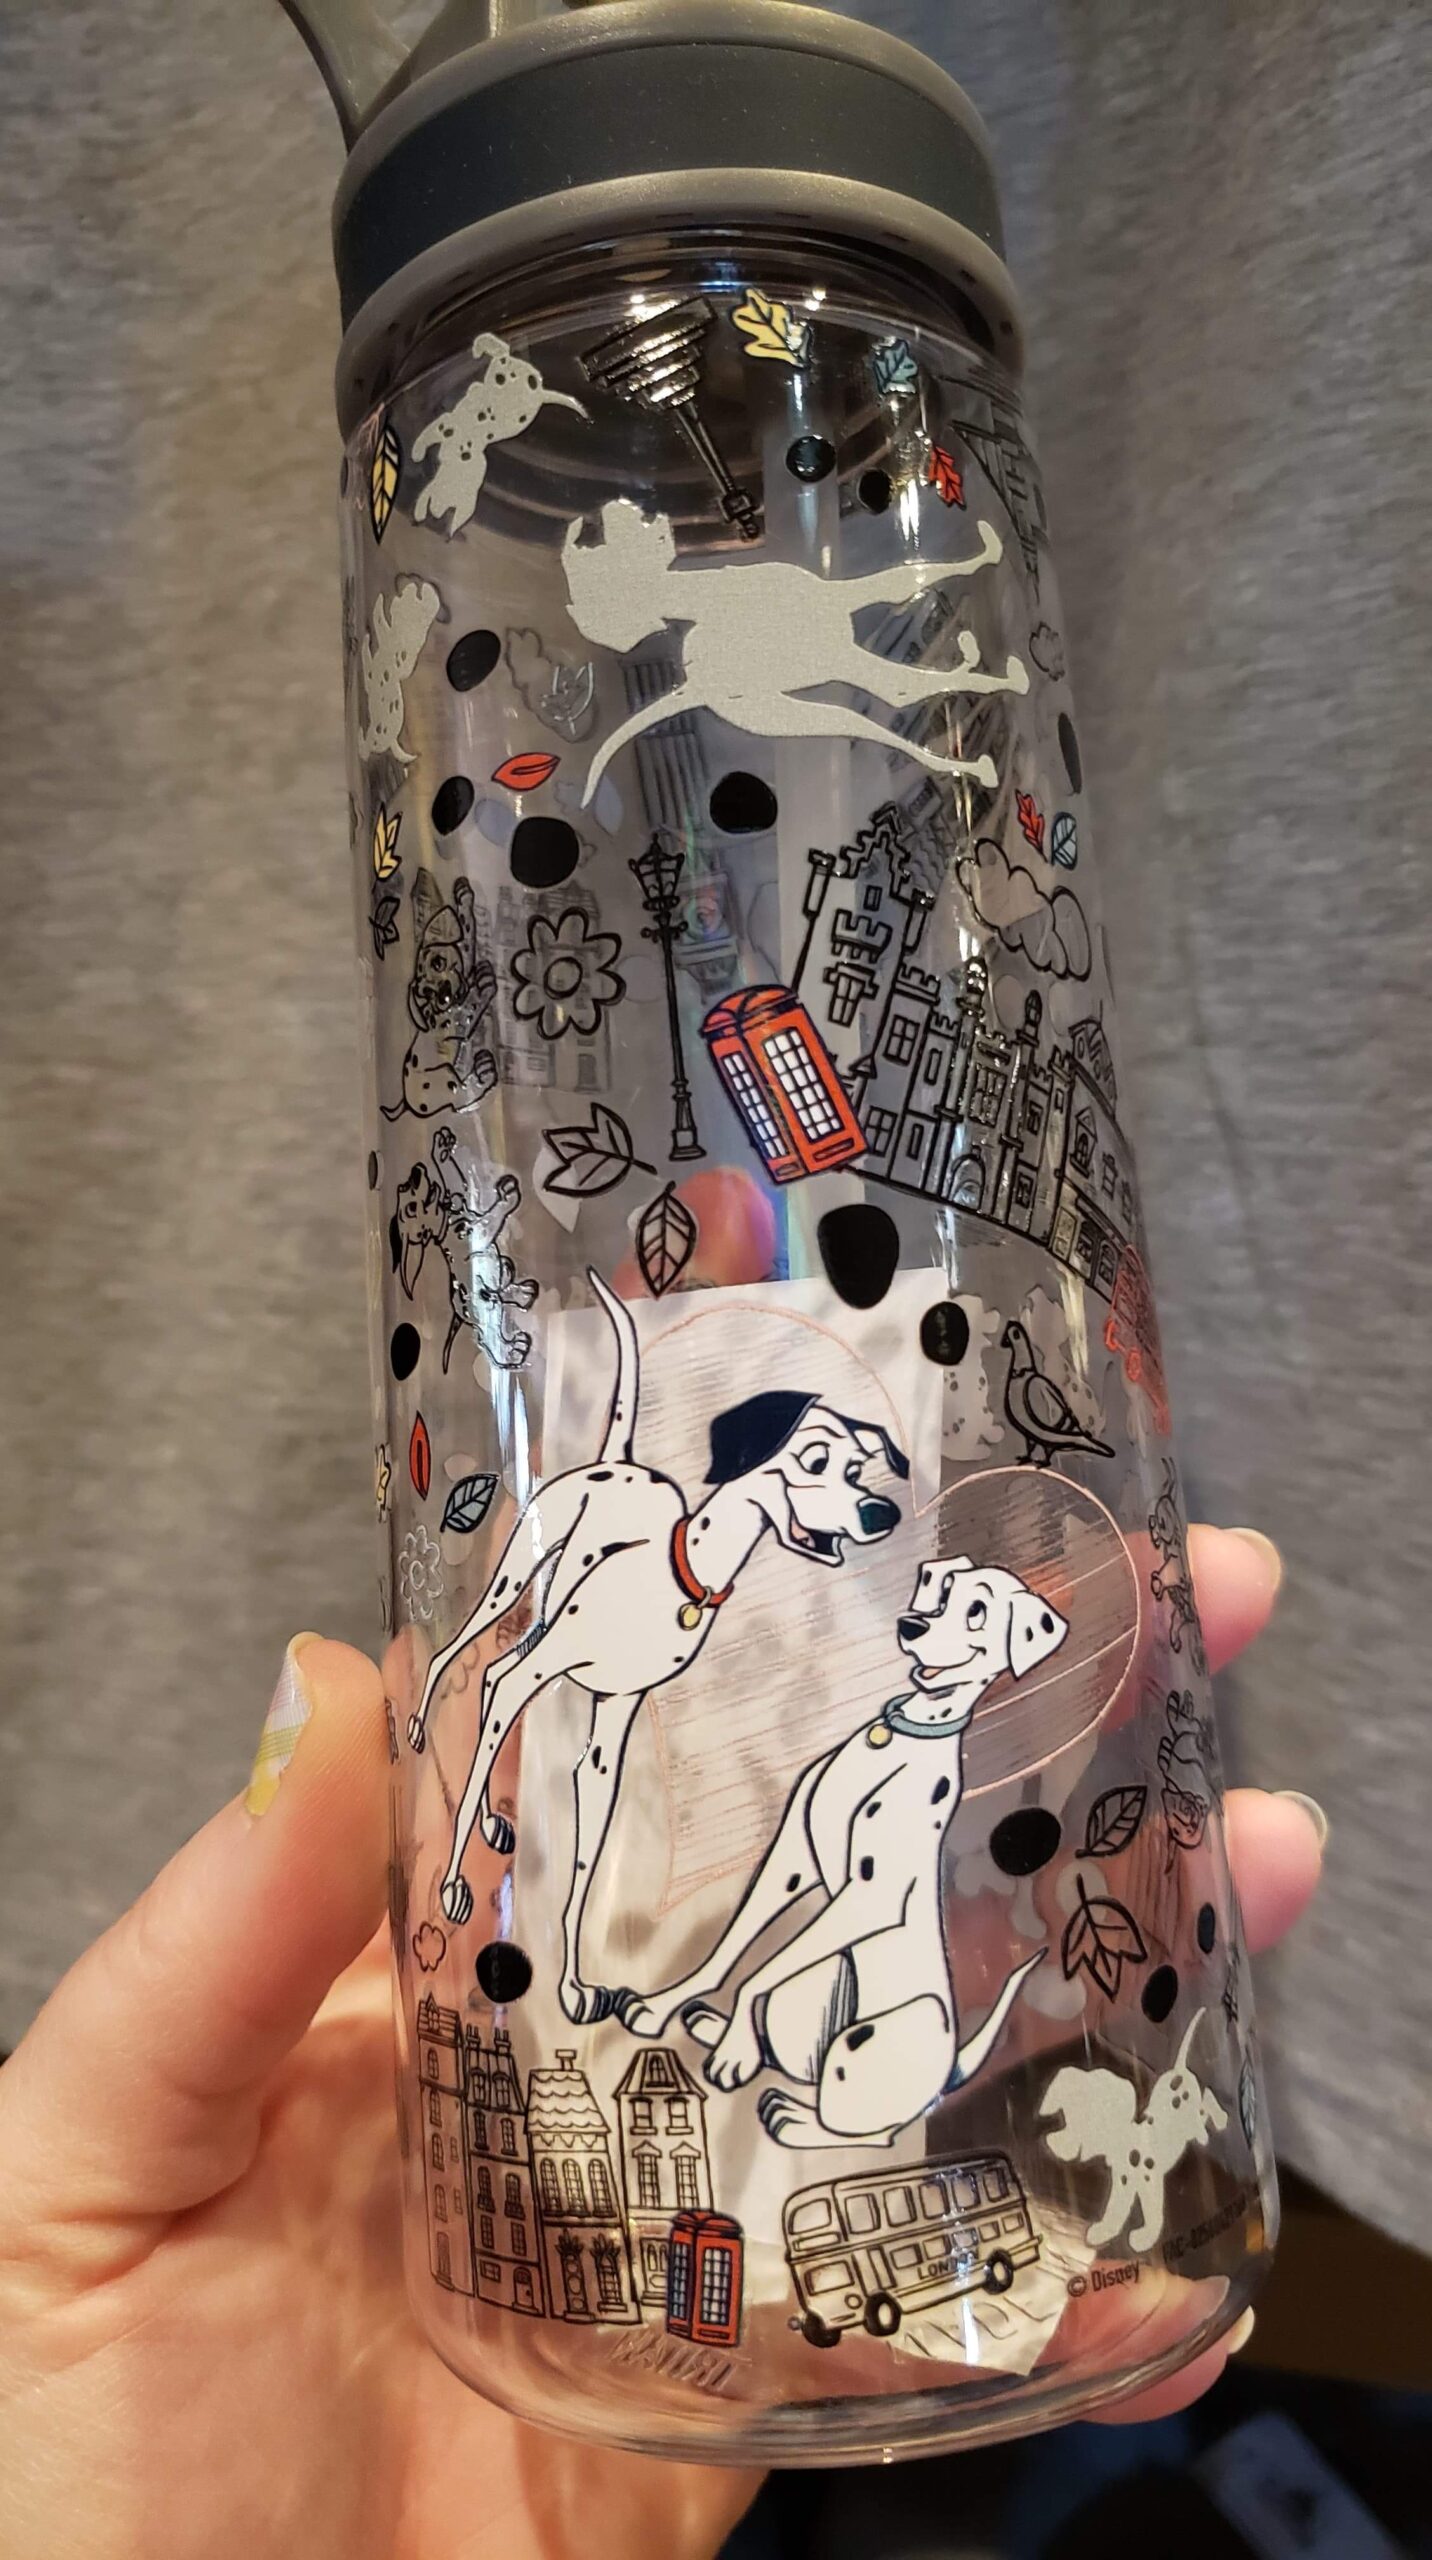 In addition to Mary Poppins, Peter Pan, and Alice in Wonderland, there is a new 101 Dalmatians collection! 